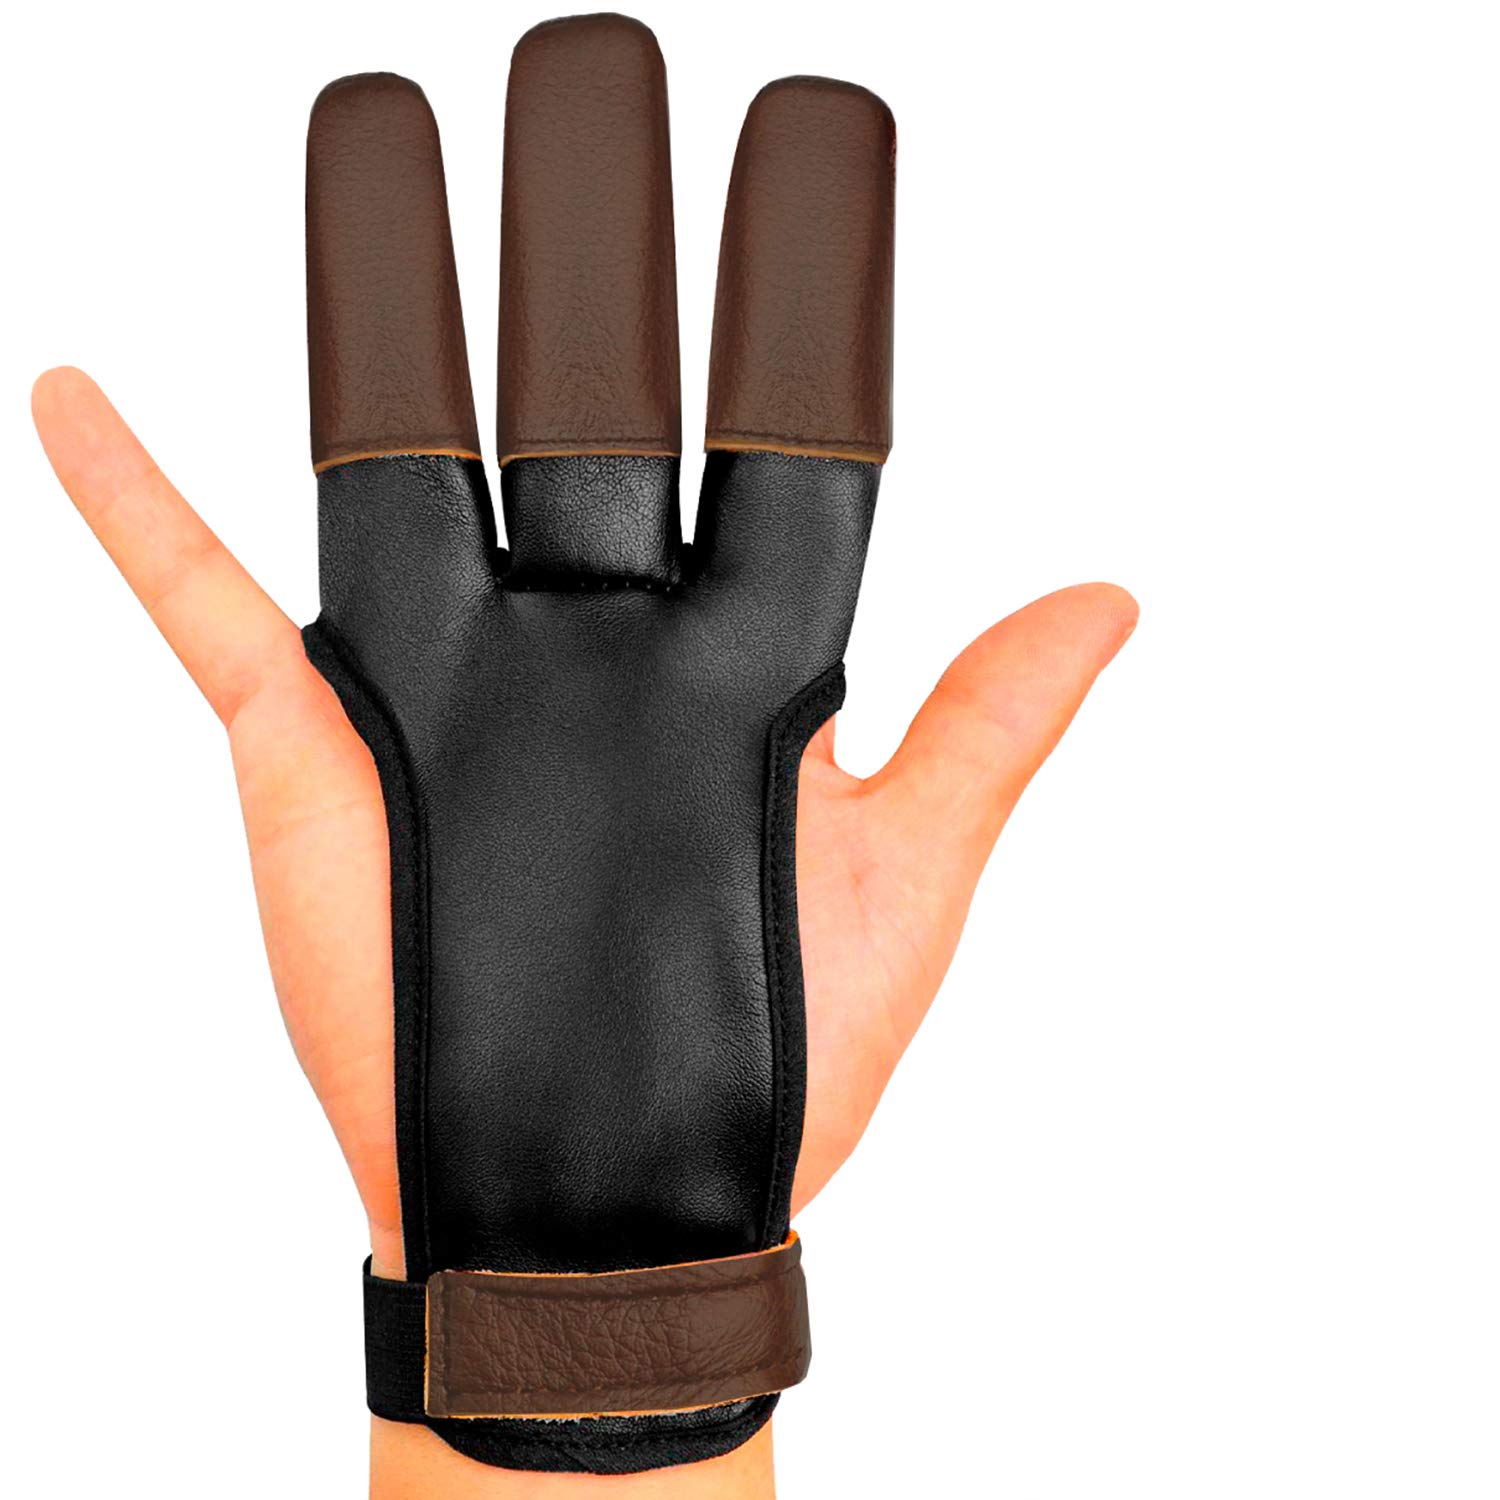 KESHES Archery Glove Finger Tab Accessories - Leather Gloves for Recurve &  Compound Bow - Three Finger Guard for Men Women & Youth Large